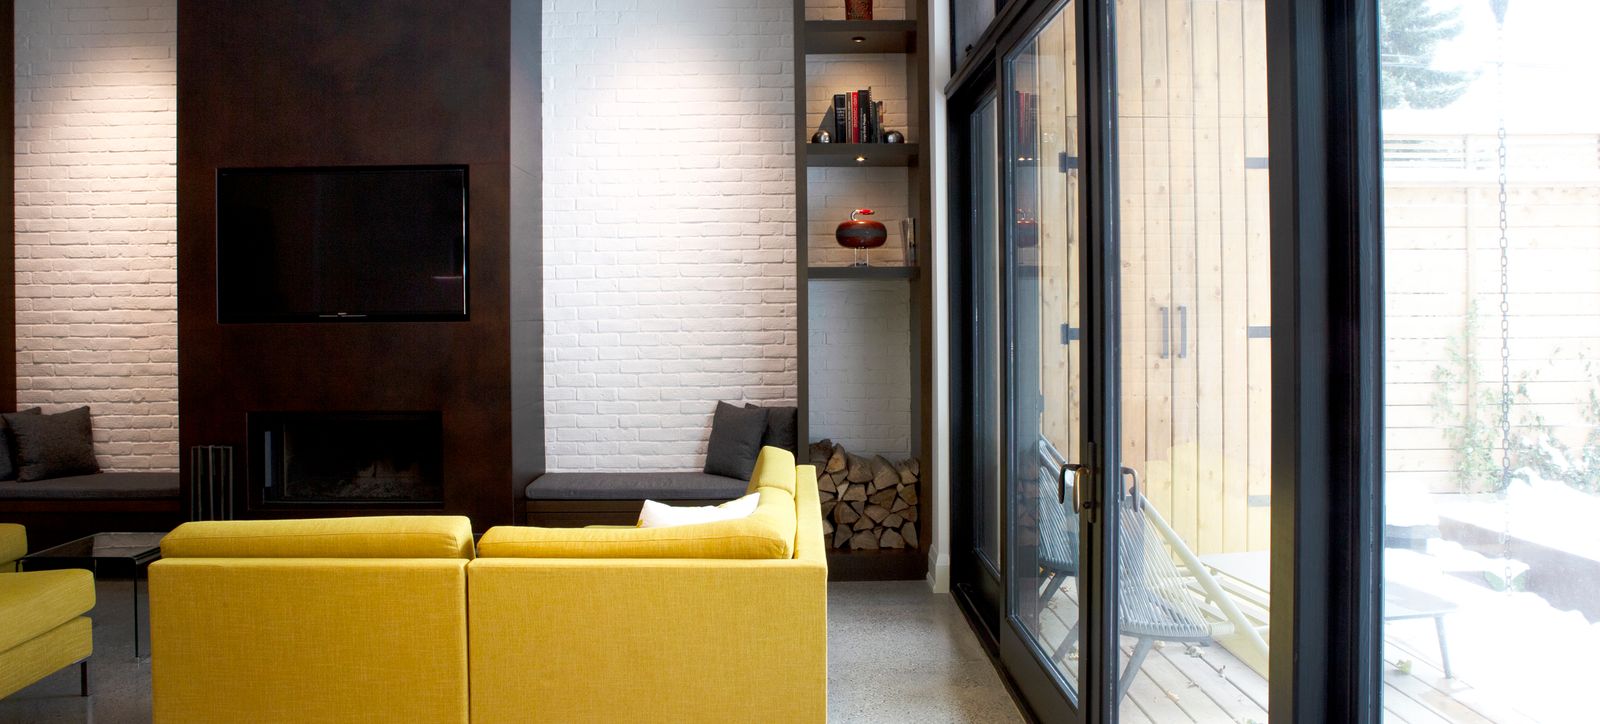 white brick living room toronto ontario with bright yellow couch